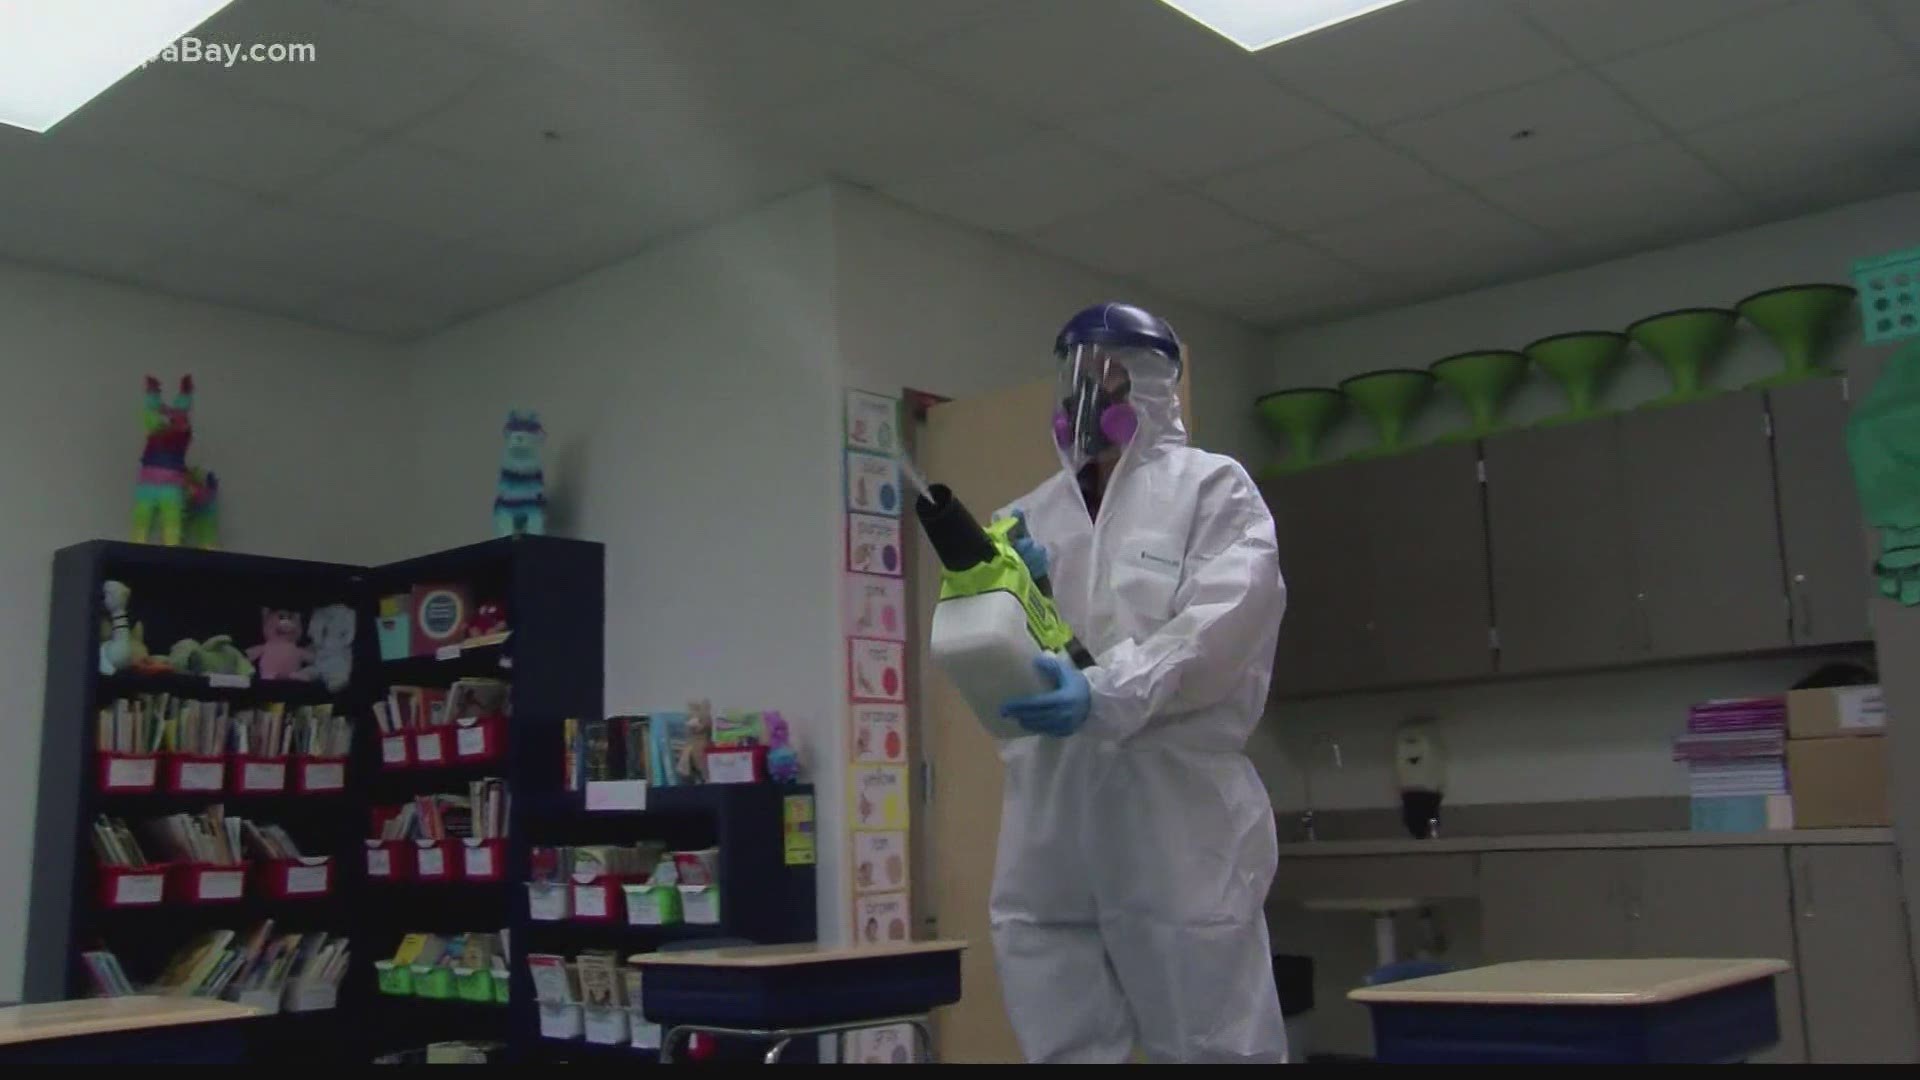 The district has had a handful of staff test positive for COVID-19 over the summer, so they've had a crash course in disinfecting schools and offices.